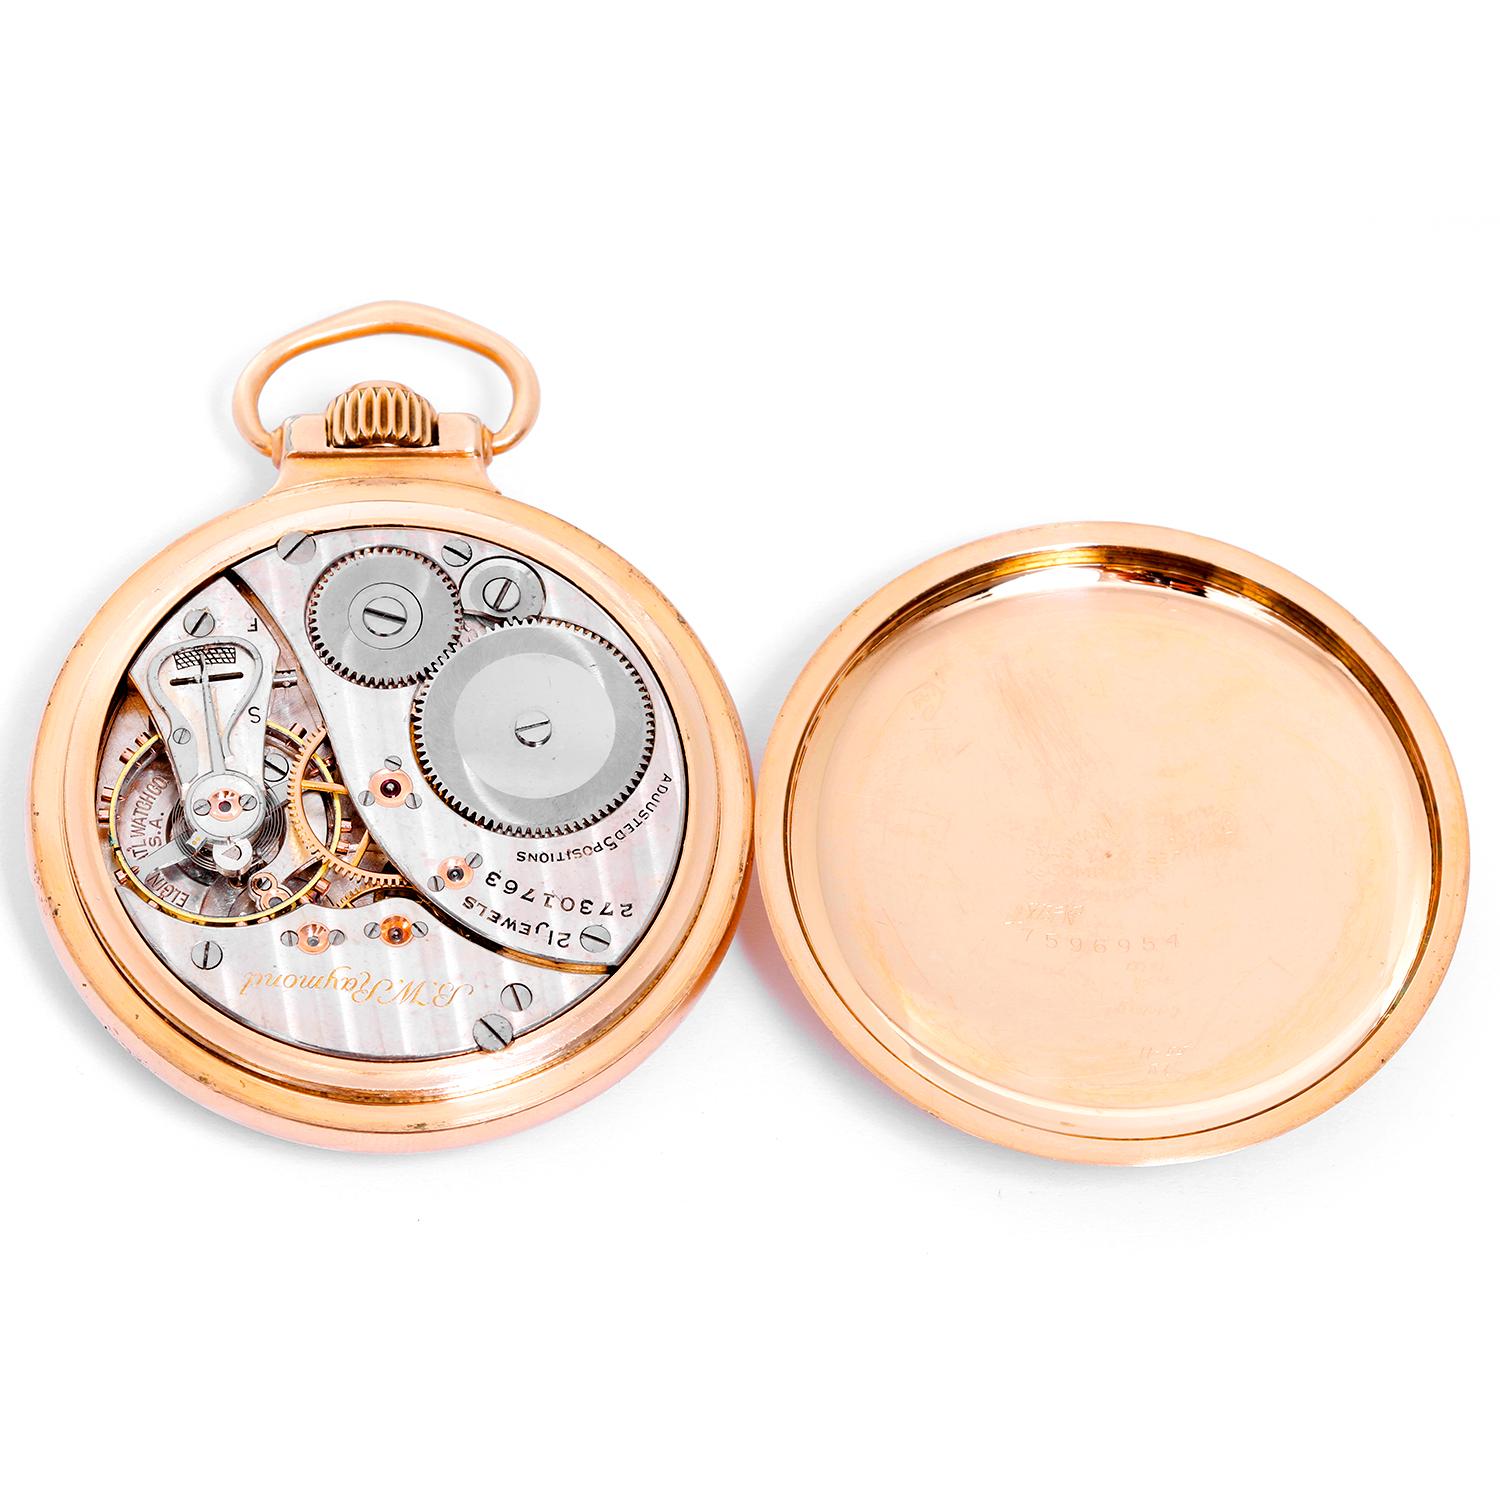 Elgin R. R. Railroad Approved  Pocket Watch - 21 Jewel. Gold fileld ( 50 mm ) . White enamel single sunk dial with Arabic numerals . Pre-owned with custom box. Railroad approved.